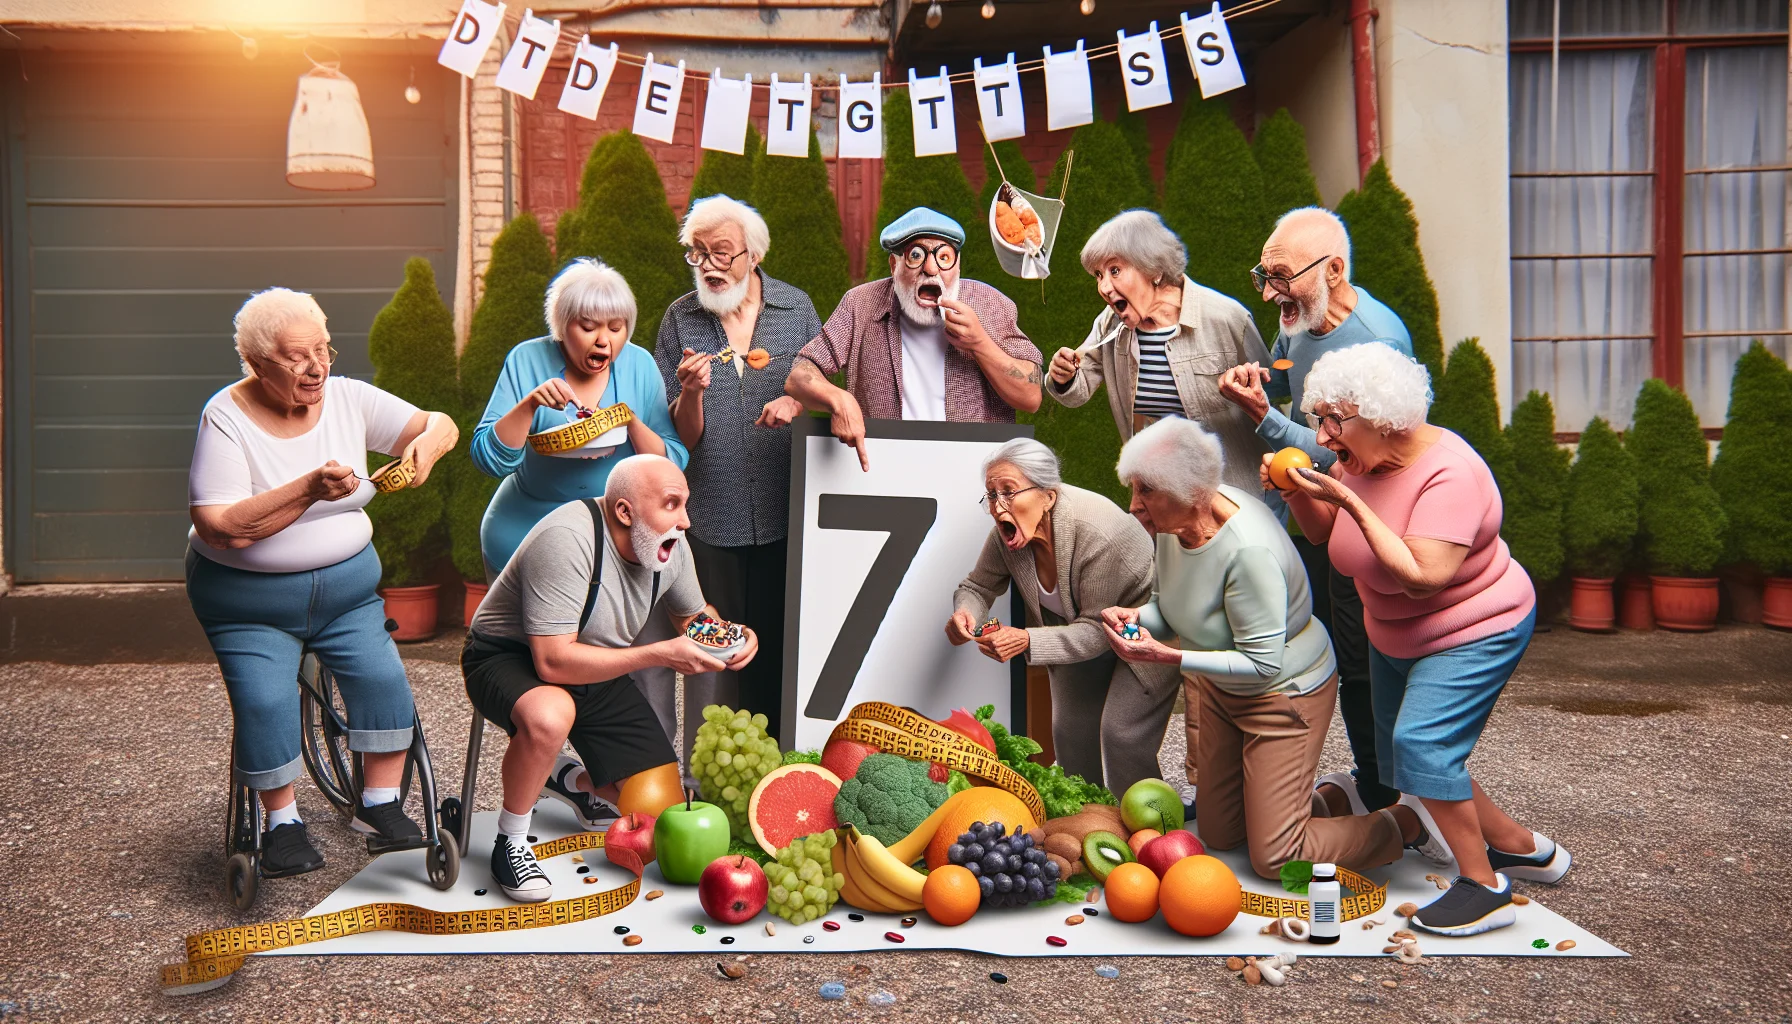 Create a humorous yet realistic scene depicting an outdoor gathering of nine elderly individuals, who are all from a variety of descents such as Caucasian, Hispanic, Black, Middle-Eastern, South Asian, and White. They are engaged in a rather amusing scenario related to diets and healthy eating. There is a big '7' displayed in a creative fashion, perhaps on a banner or a sign. Some of them are struggling to read the small print on nutrition labels, some are experimenting with eating exotic fruits and veggies, and others are laughing while trying to open stubborn health supplement bottles.